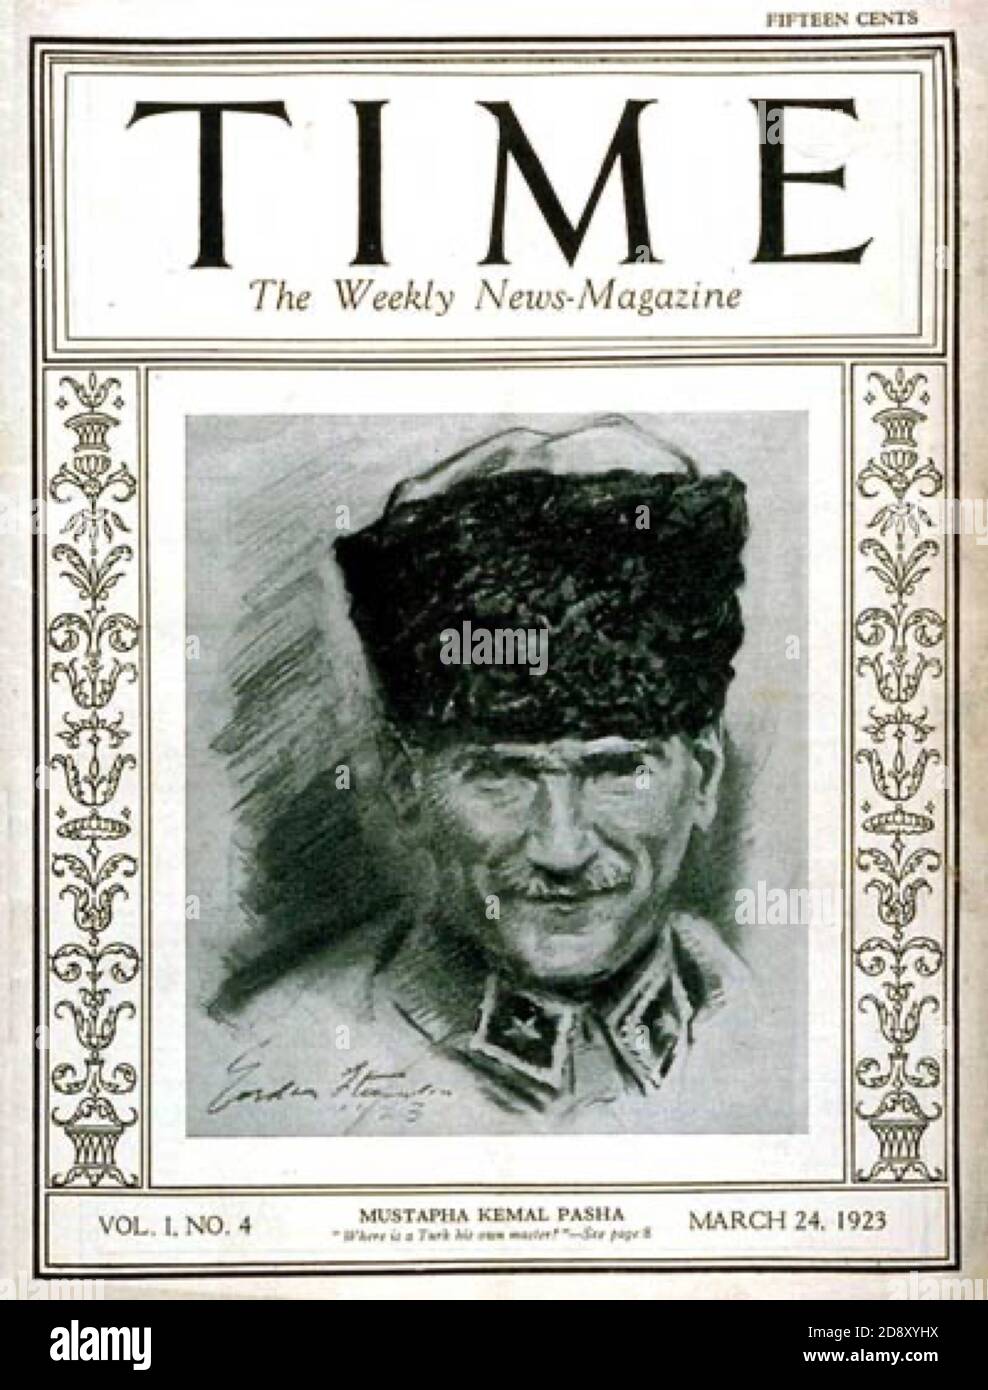 Portrait of Mustafa Kemal Ataturk as appearing on the front cover of Time magazine's fourth ever issue March 1923 - Cover Design - Gordon Stevenson. Stock Photo